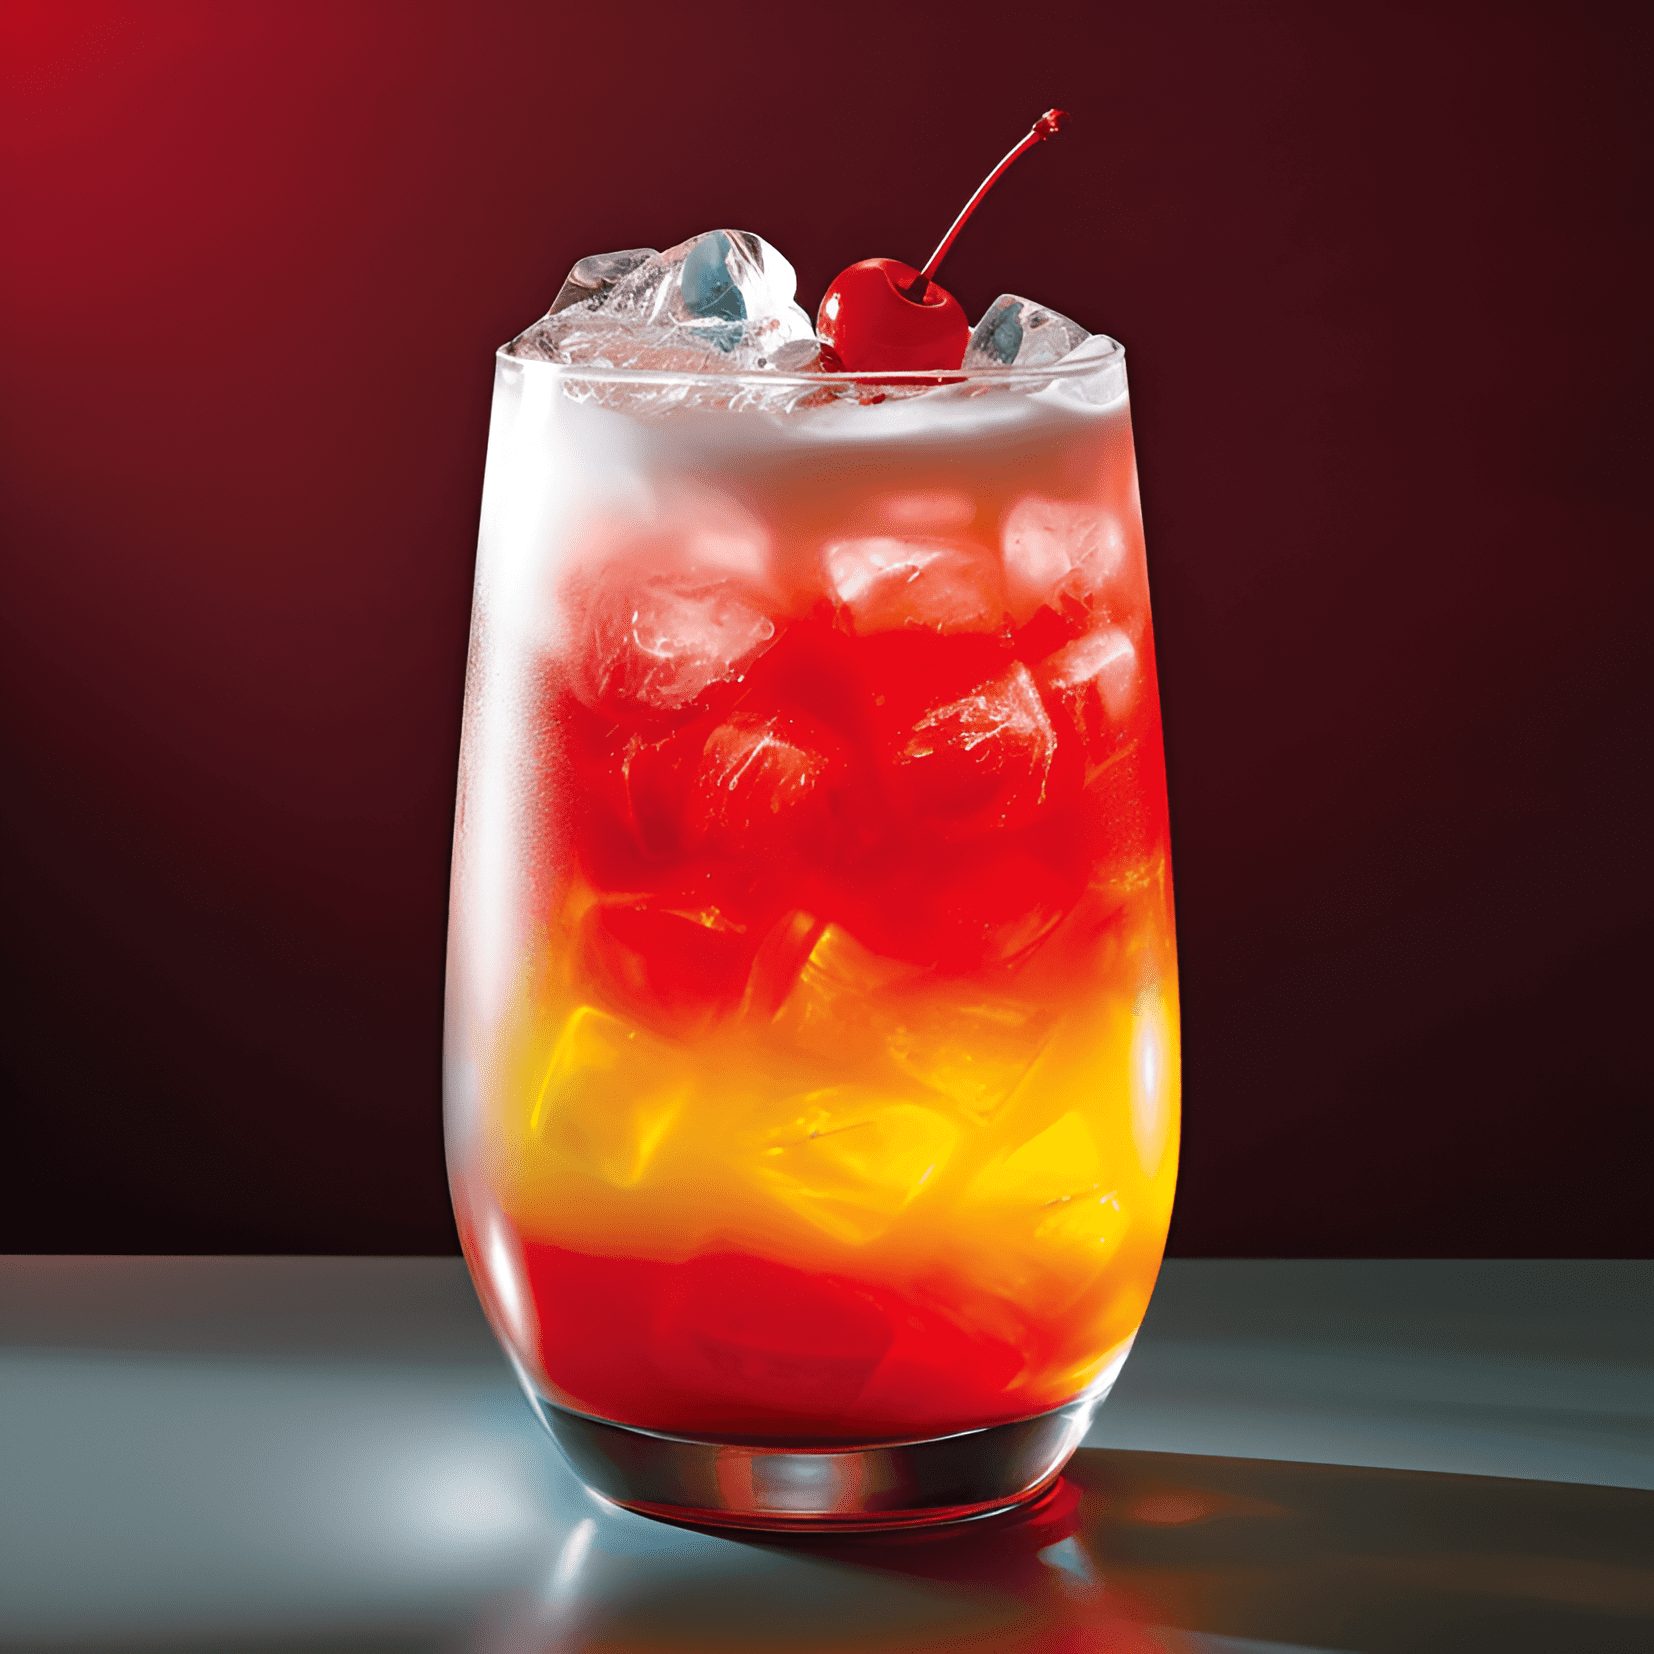 Jamaican Cocktail Recipe - The Jamaican cocktail is a delightful mix of sweet, sour, and fruity flavors. The combination of rum, pineapple juice, and grenadine creates a tropical taste sensation that is both refreshing and invigorating. The drink is well-balanced, with the tartness of the lime juice cutting through the sweetness of the other ingredients.